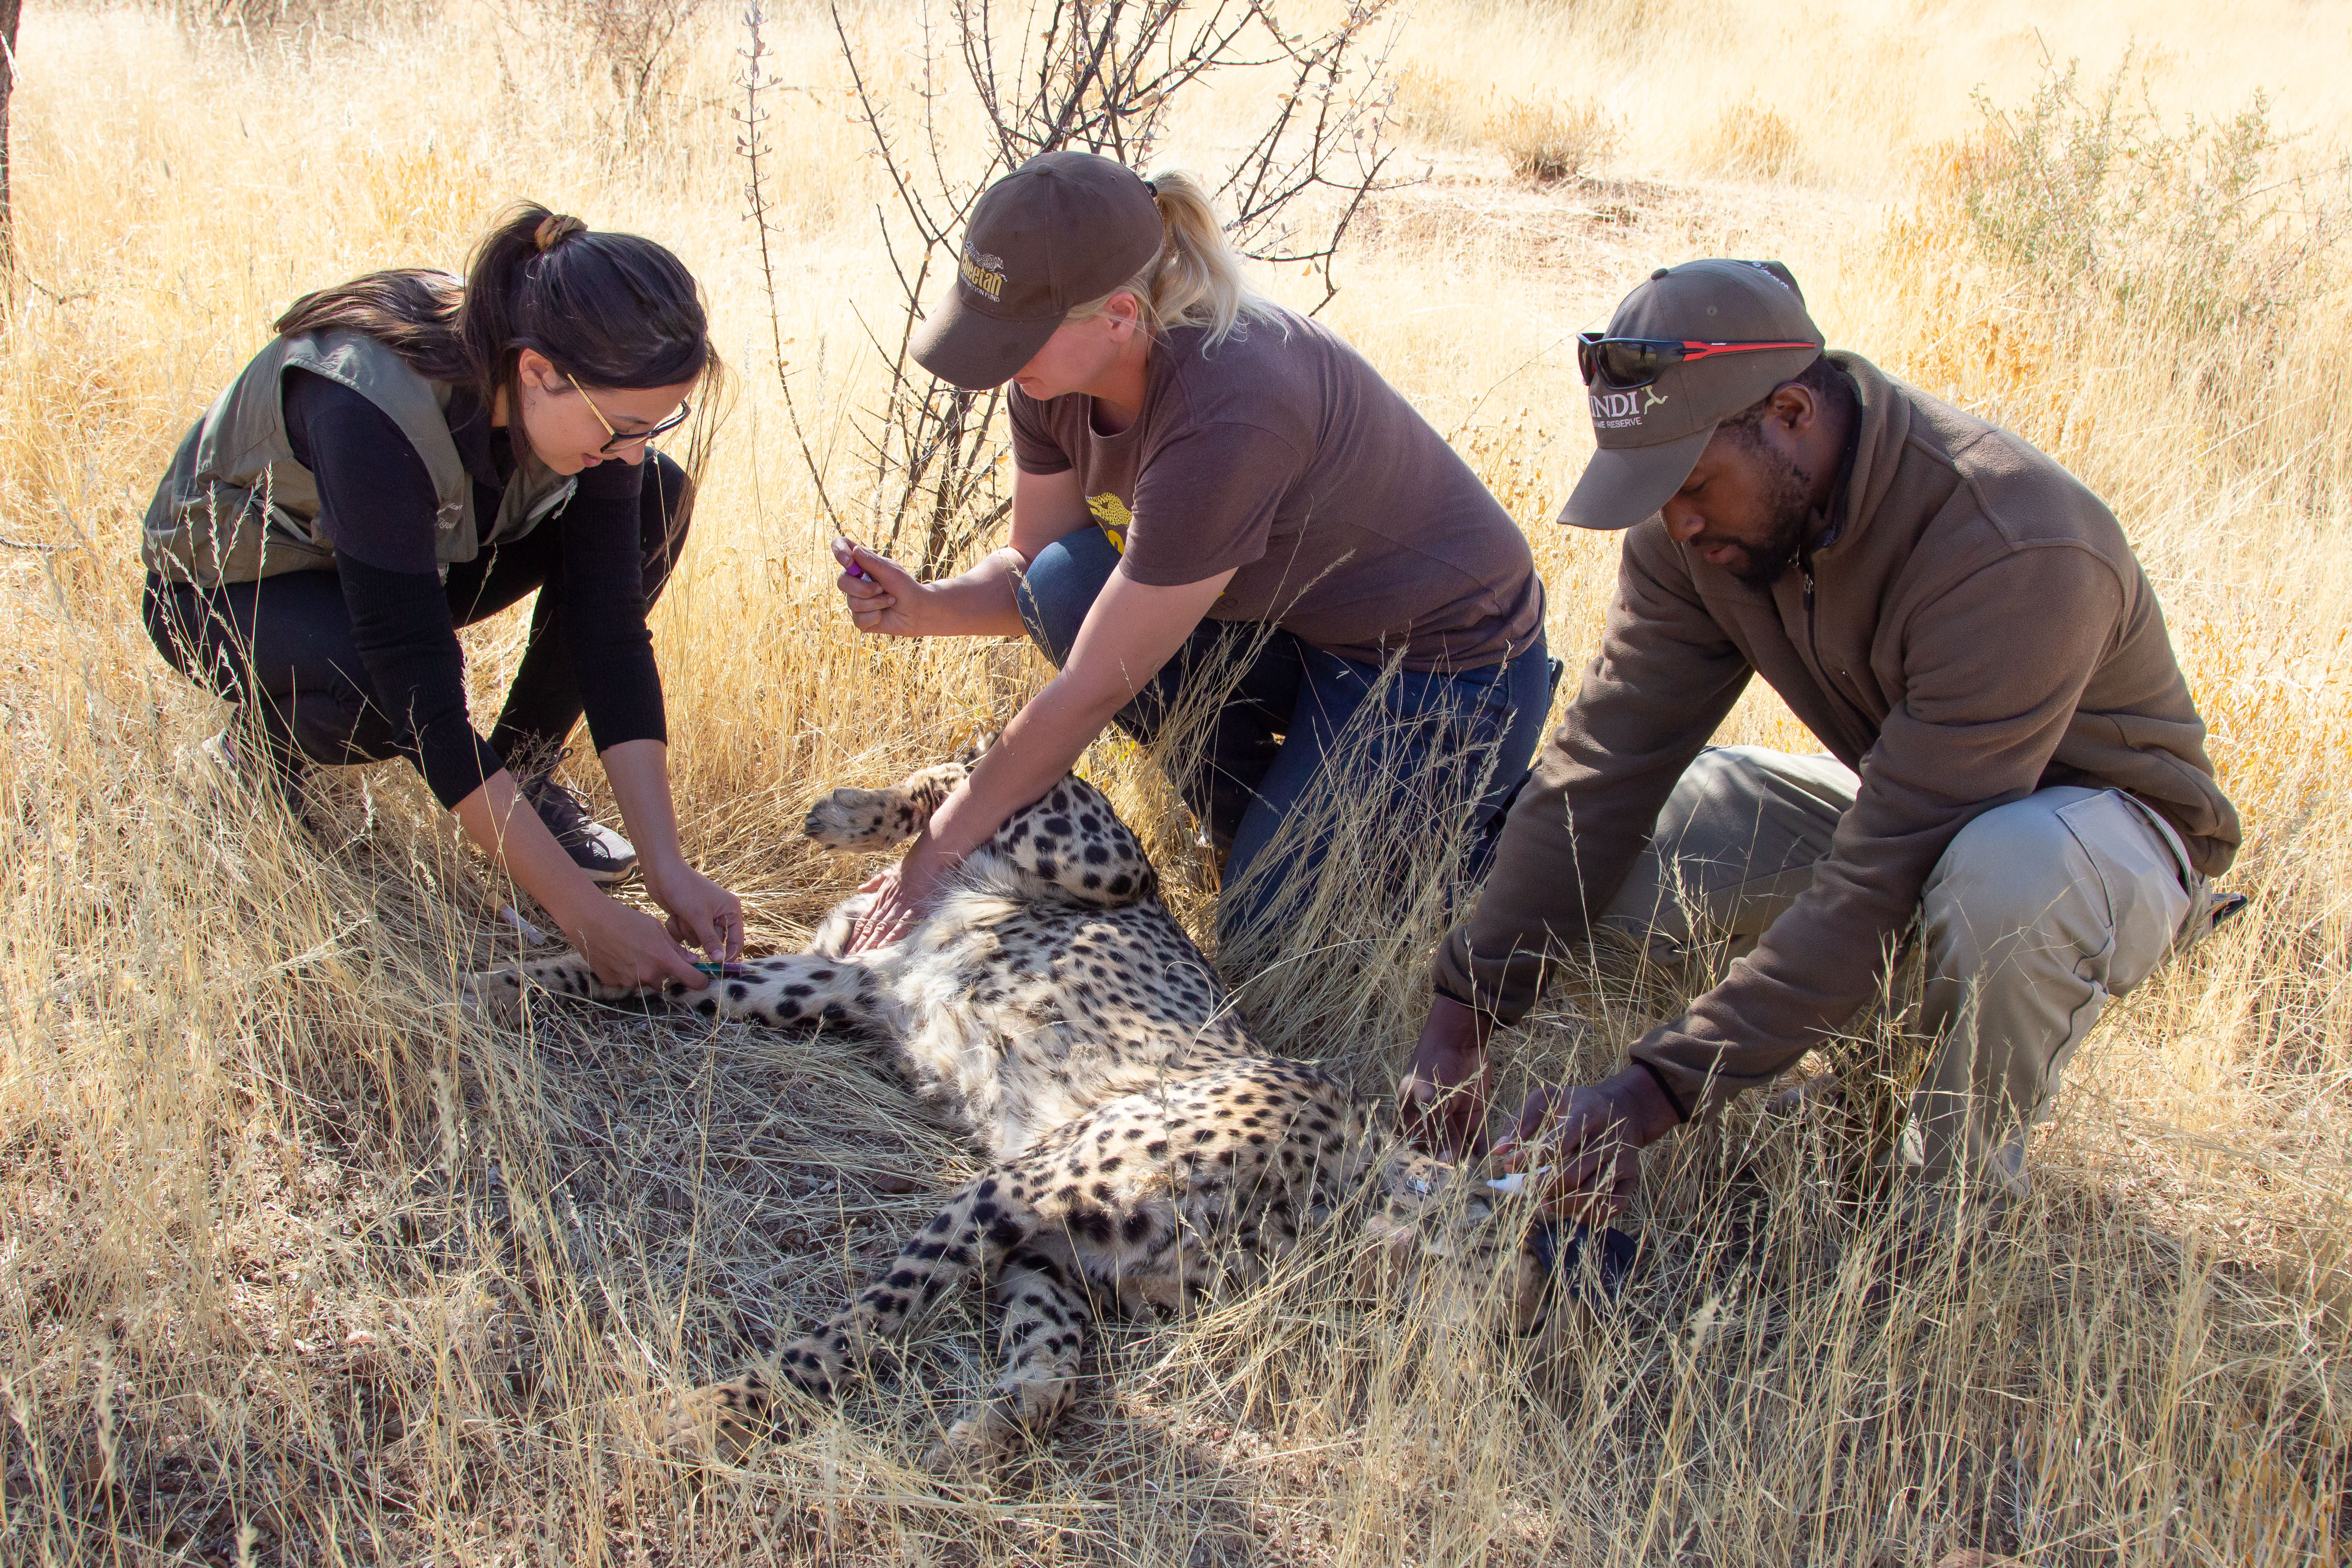 Team checking cheetah after tranquilize